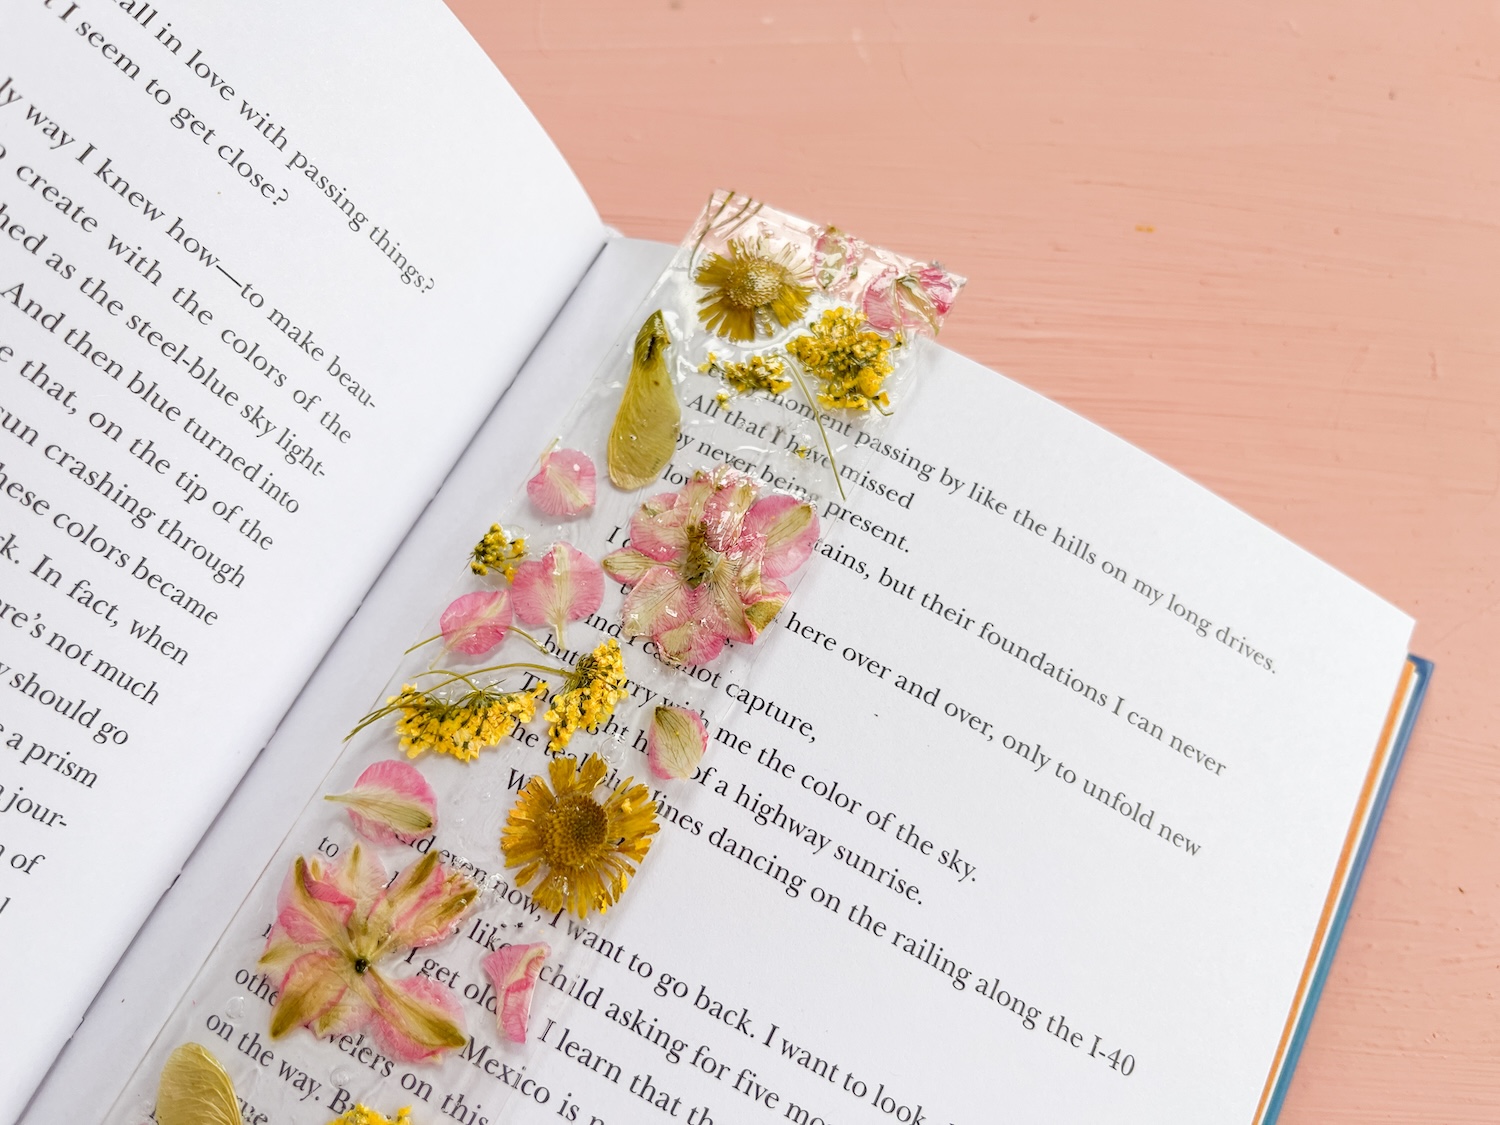 DIY Dried Flower Bookmarks from Recycled Packaging in a Morgan Harper Nichols book